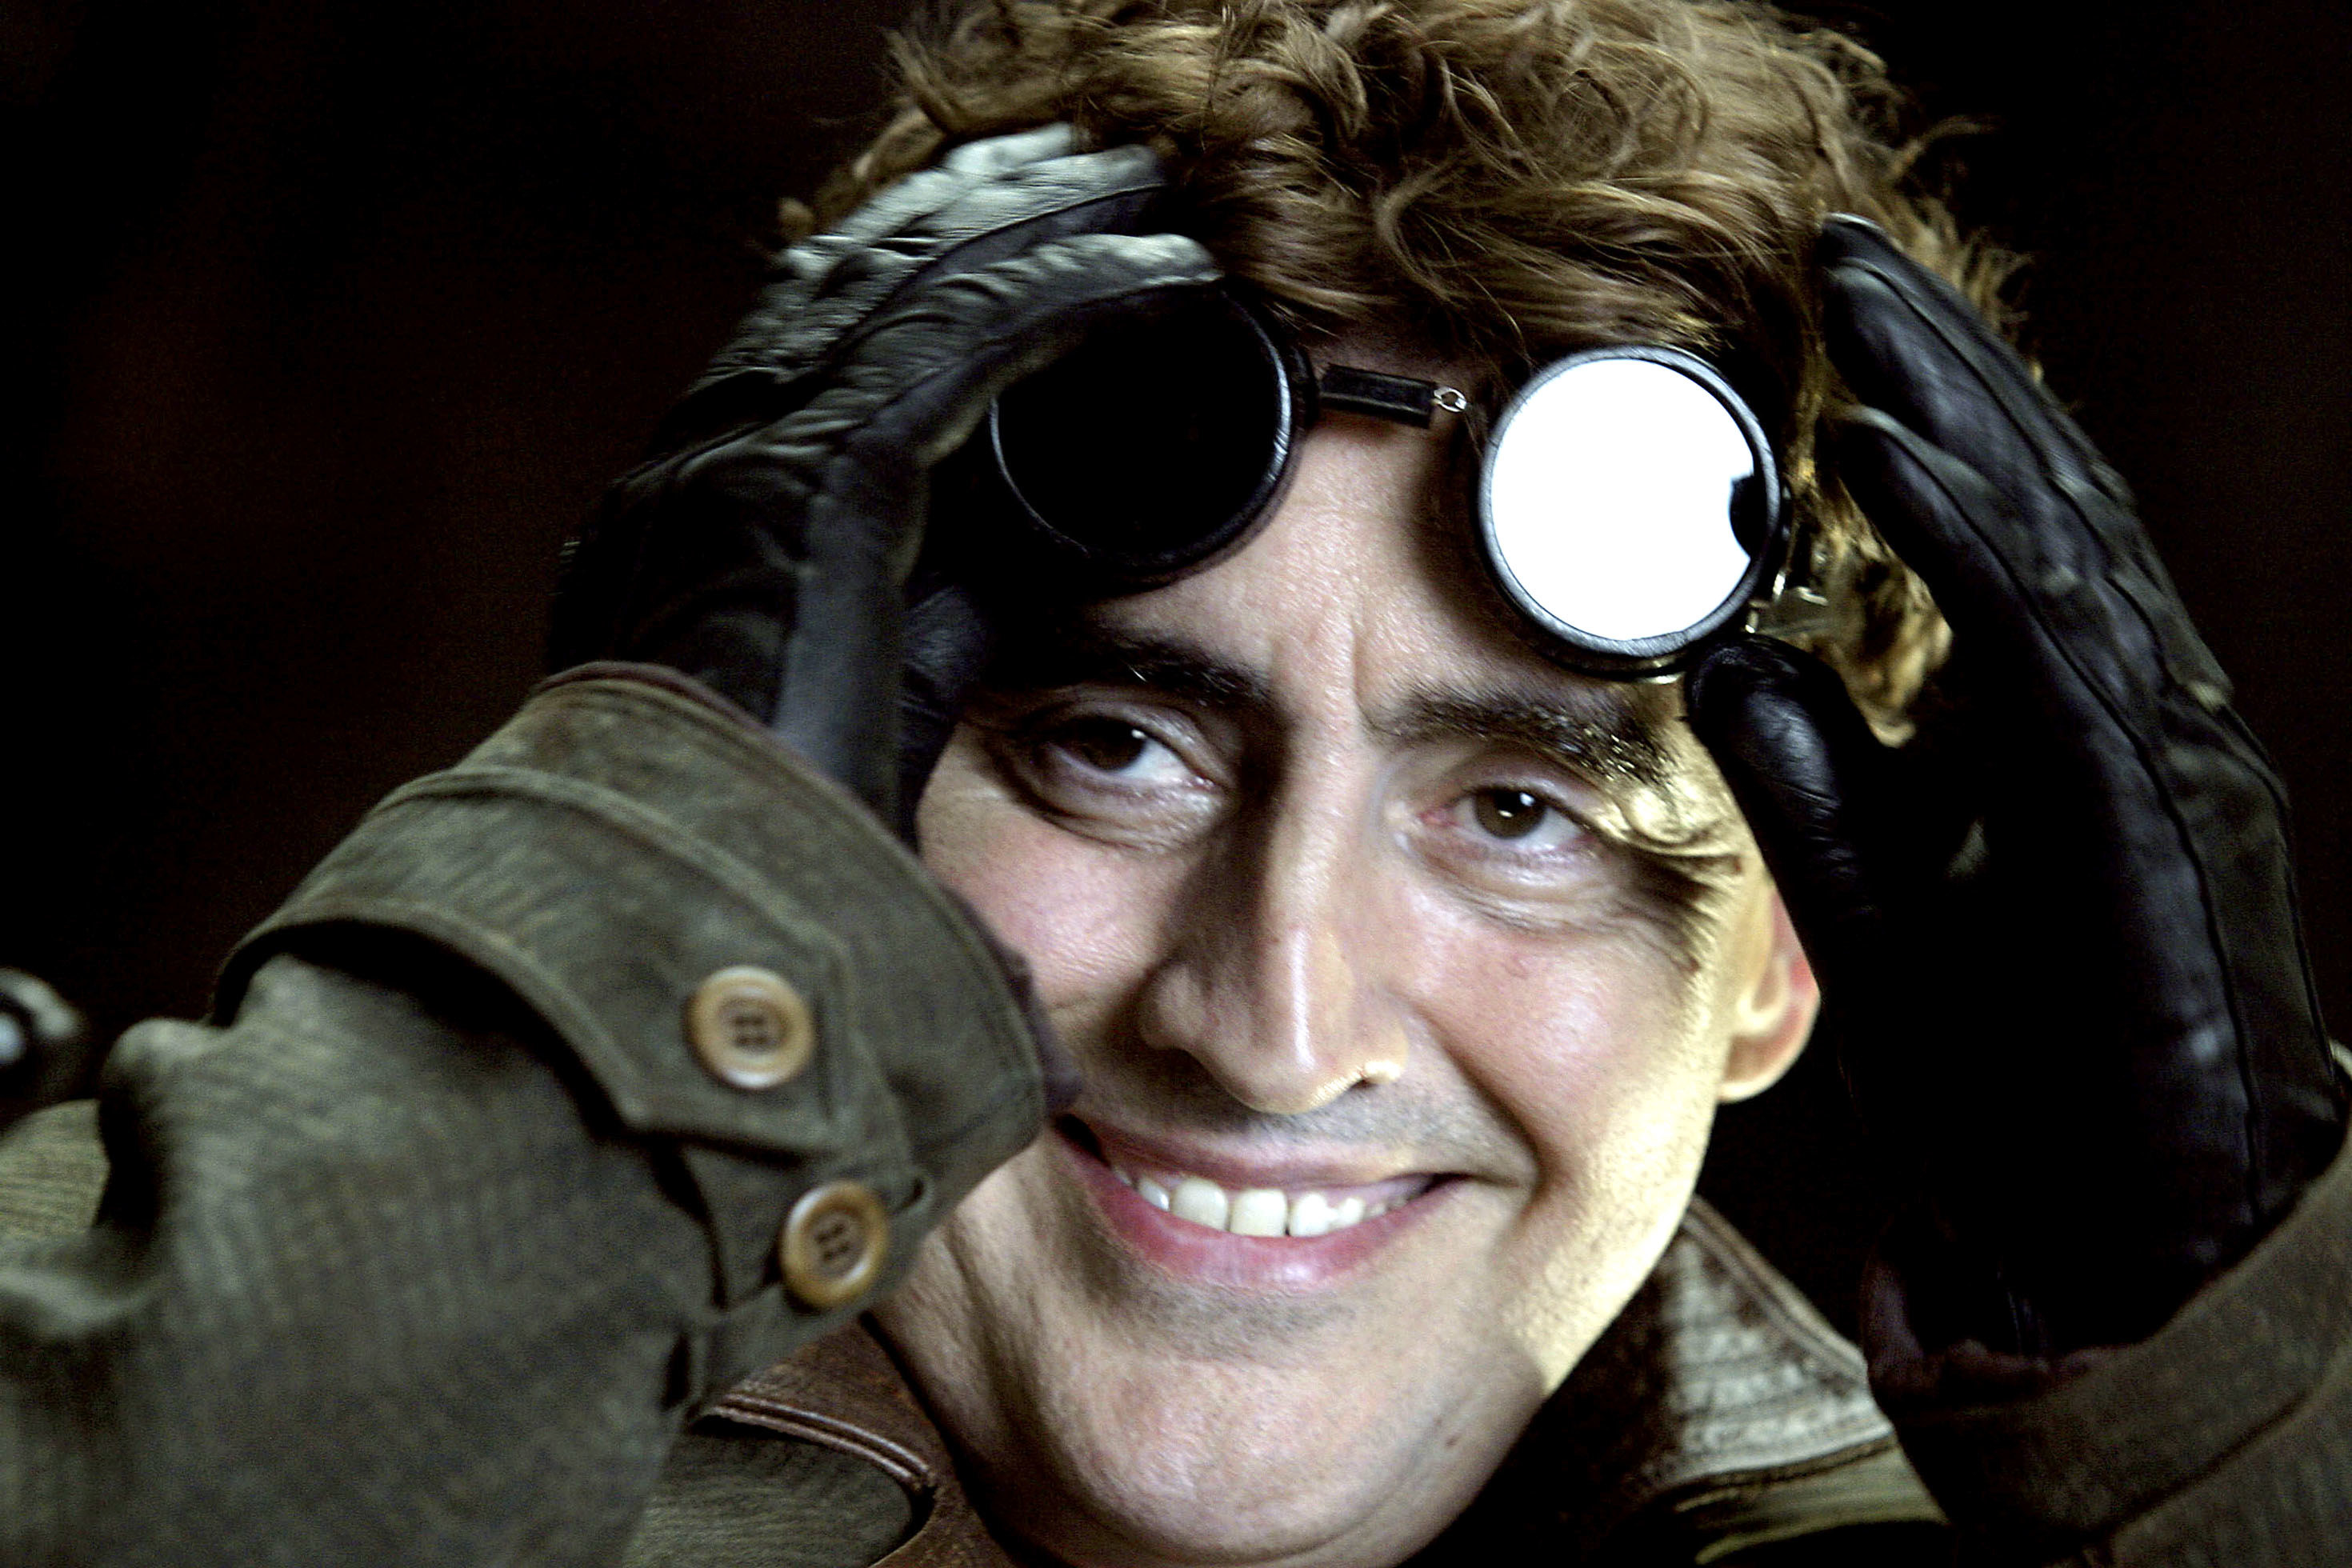 Alfred Molina smiles as he pushes his goggles off of his forehead and pushes up his shaggy hair as Doc Ock in Spider-Man 2